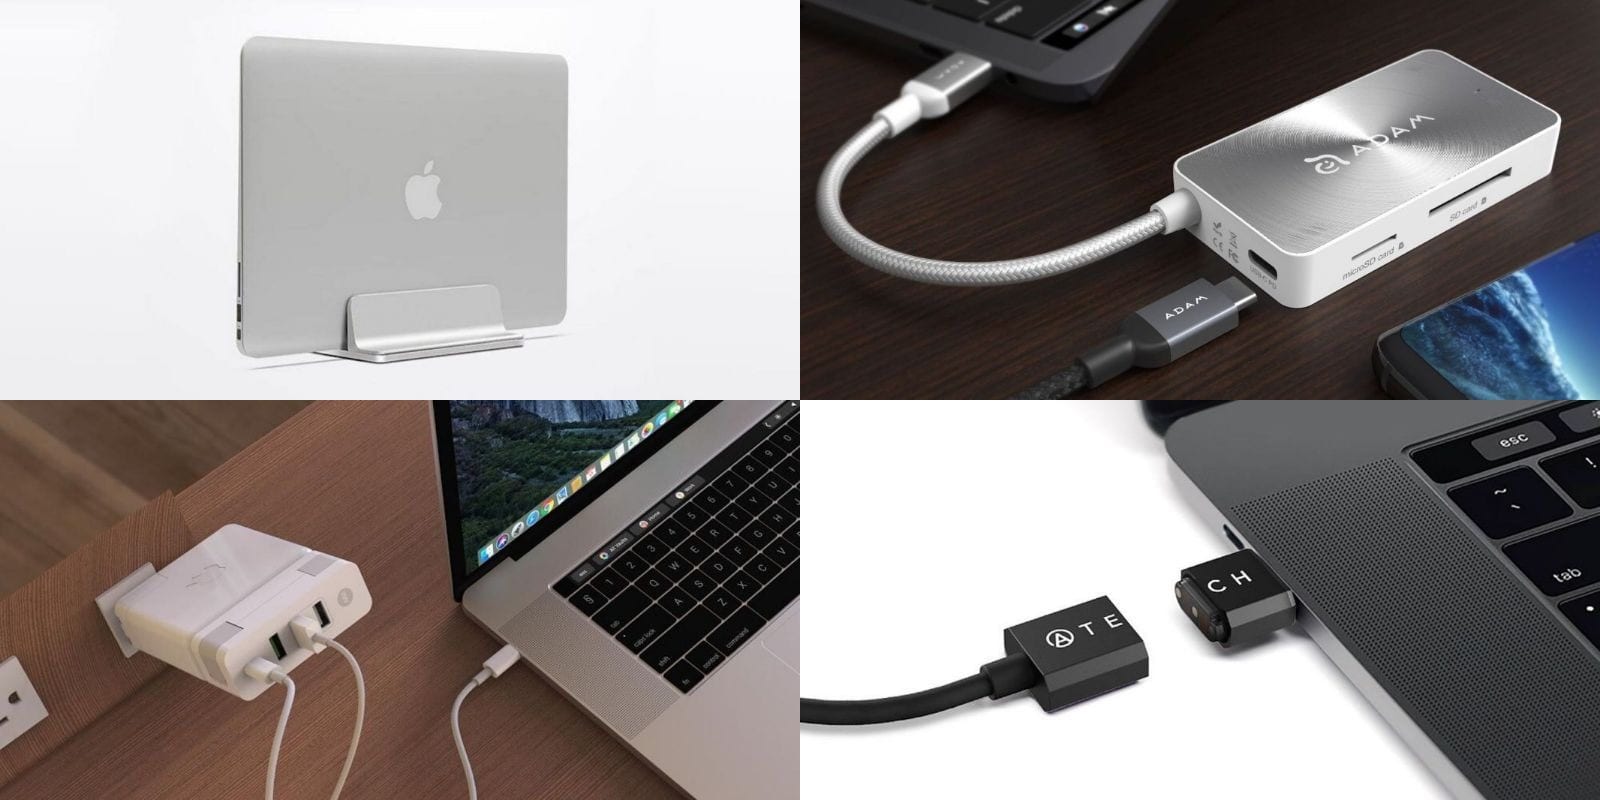 We've rounded up some of the best deals on the best accessories for MacBook.